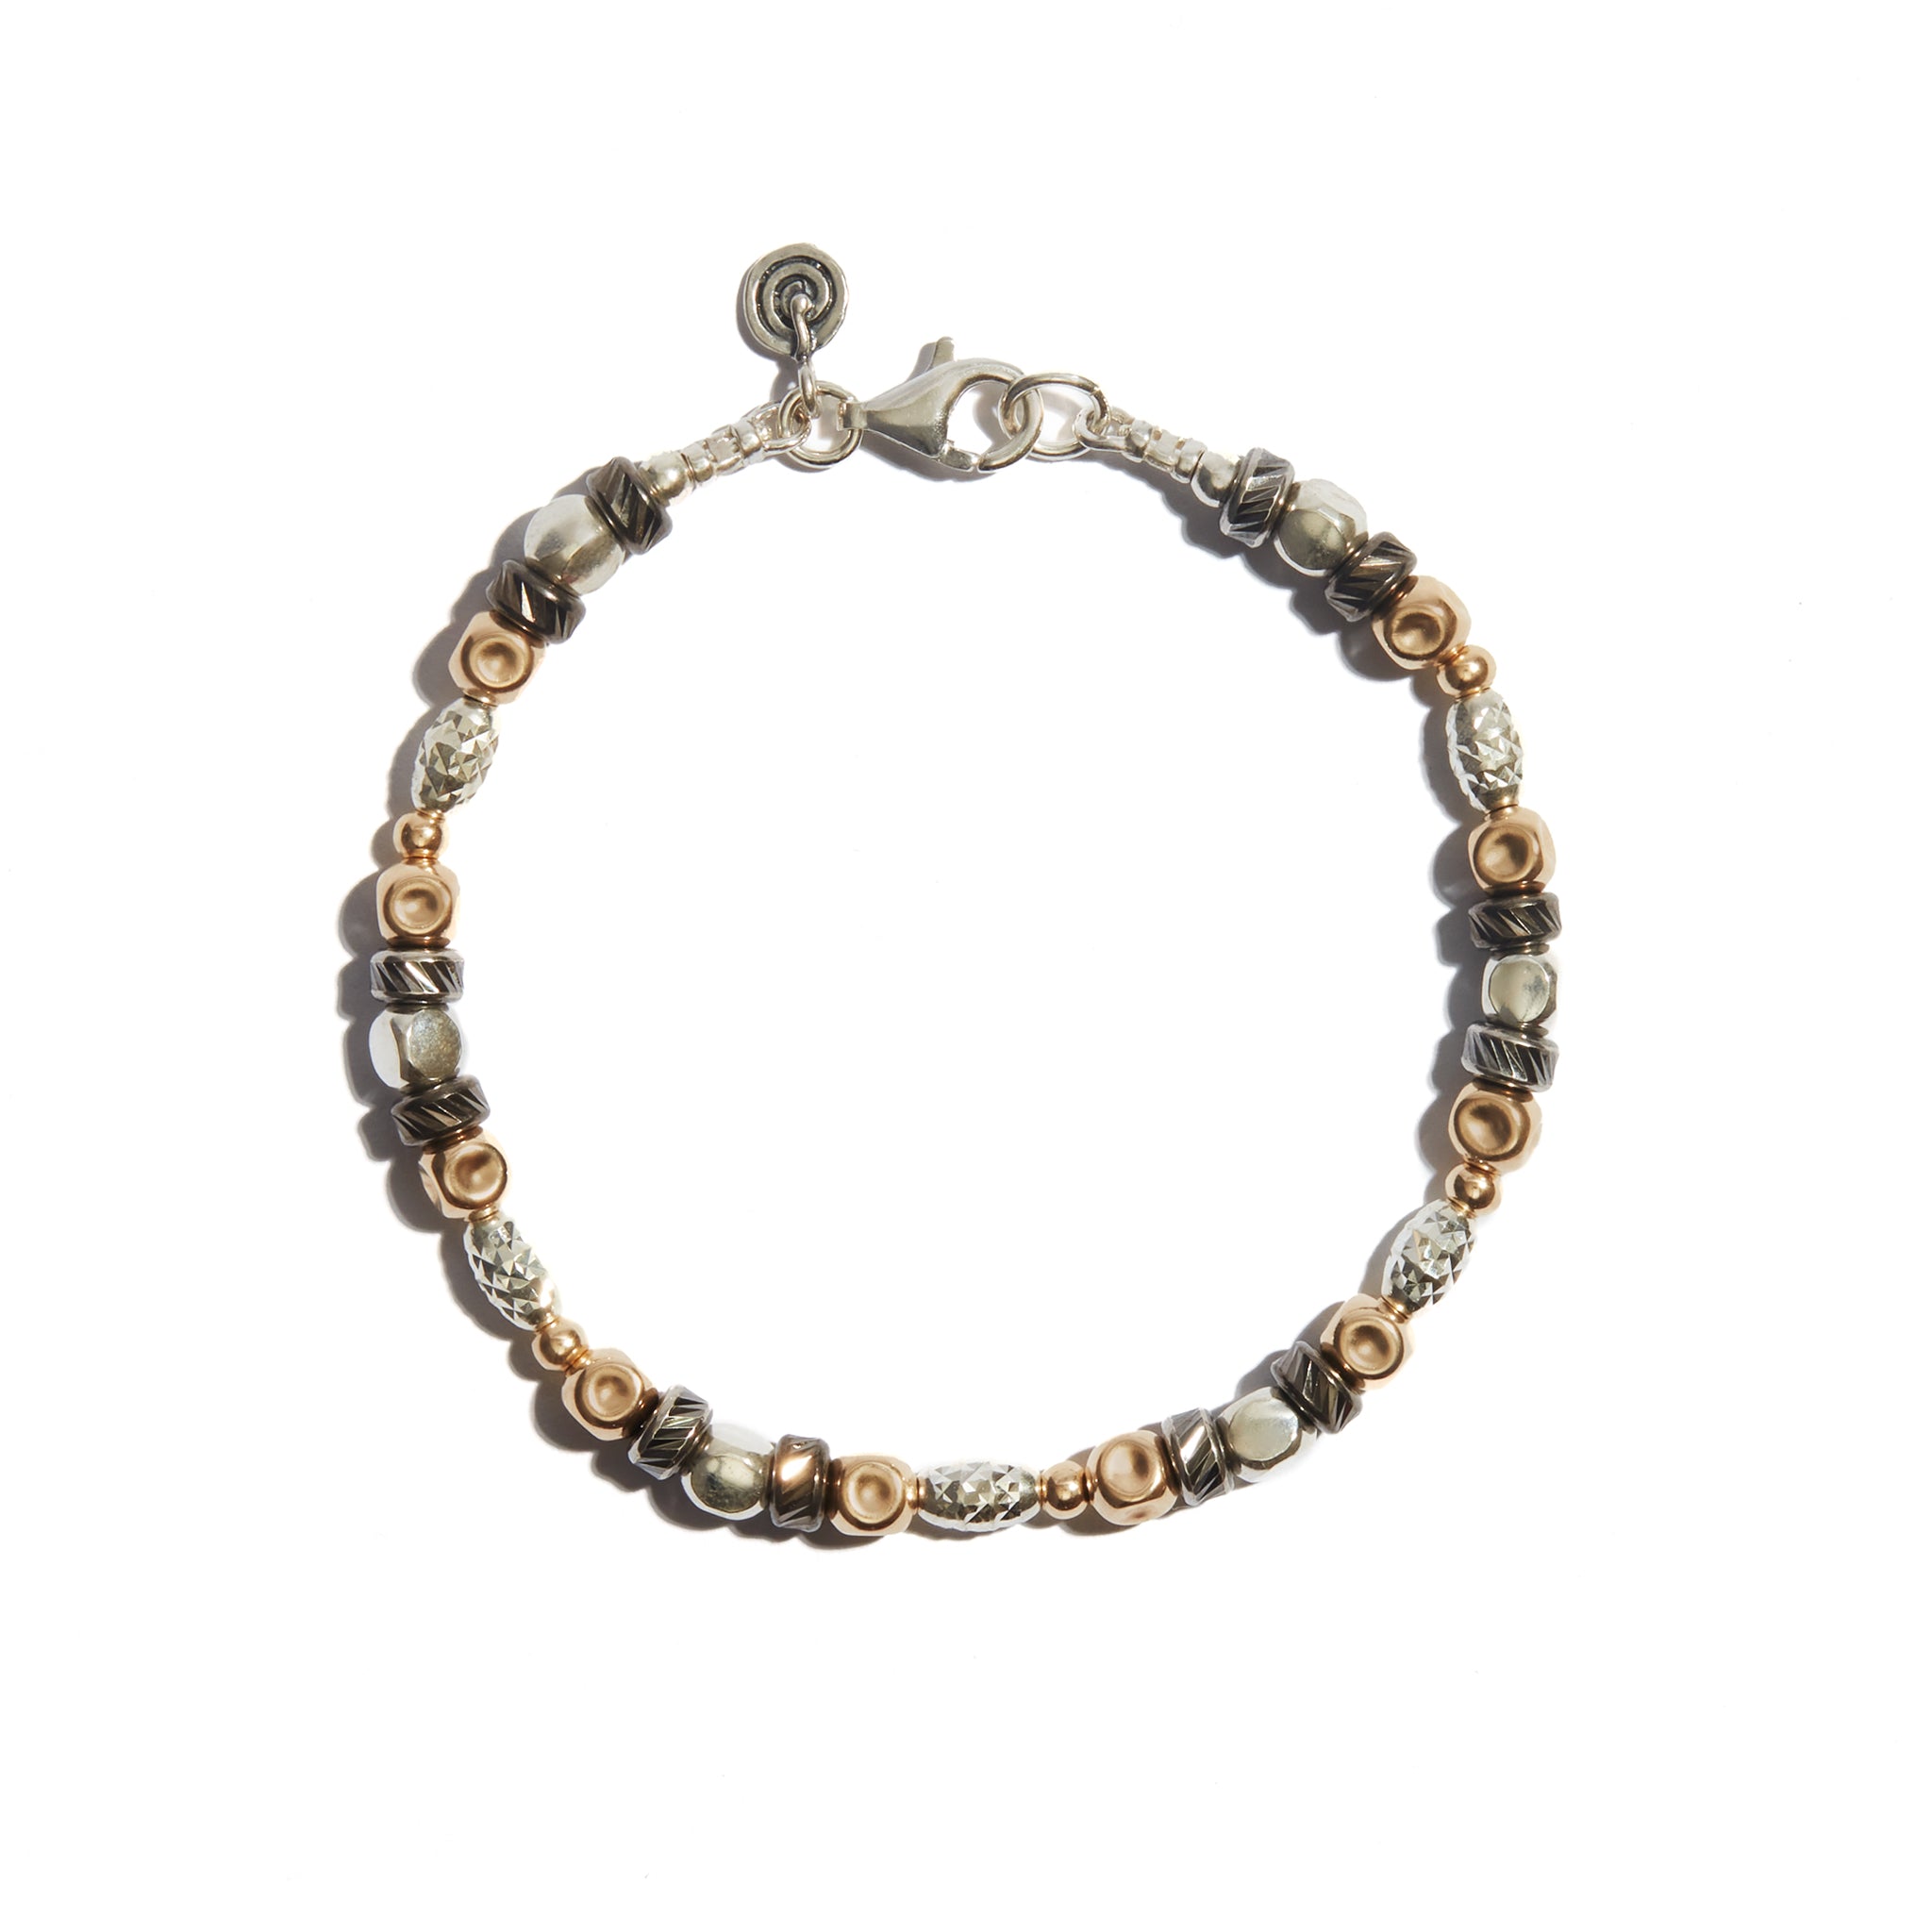 A stylish three-tone oxidized bracelet crafted from 14ct gold fill and oxidized balls, ideal as a perfect gift for someone special.